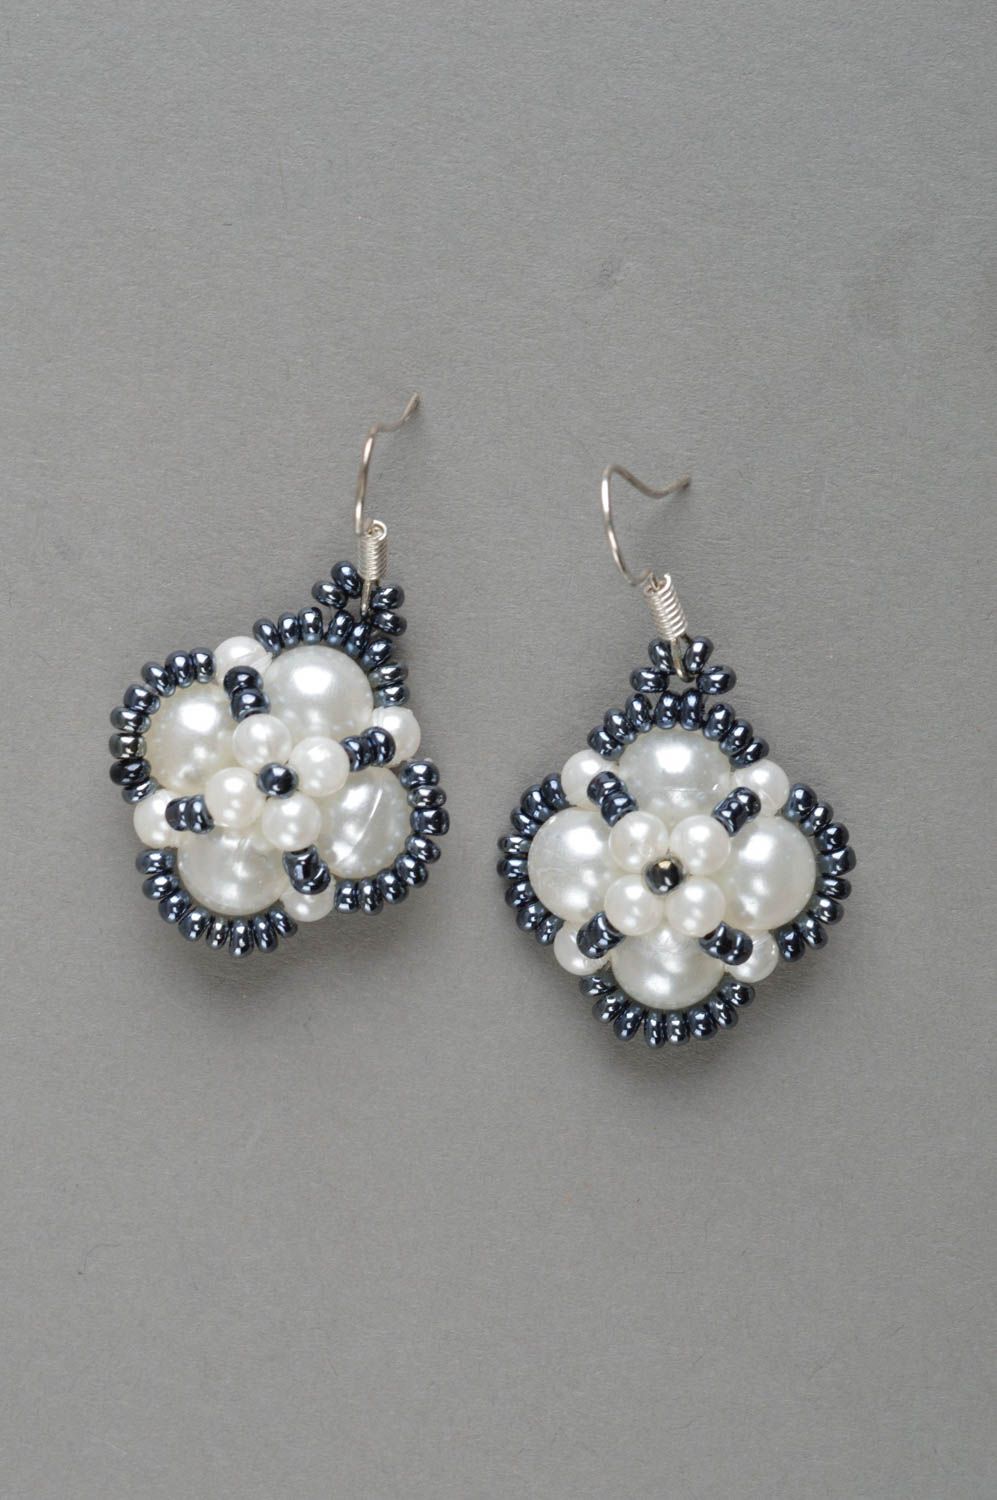 Stylish handcrafted beaded earrings fashion accessories bead weaving ideas photo 2